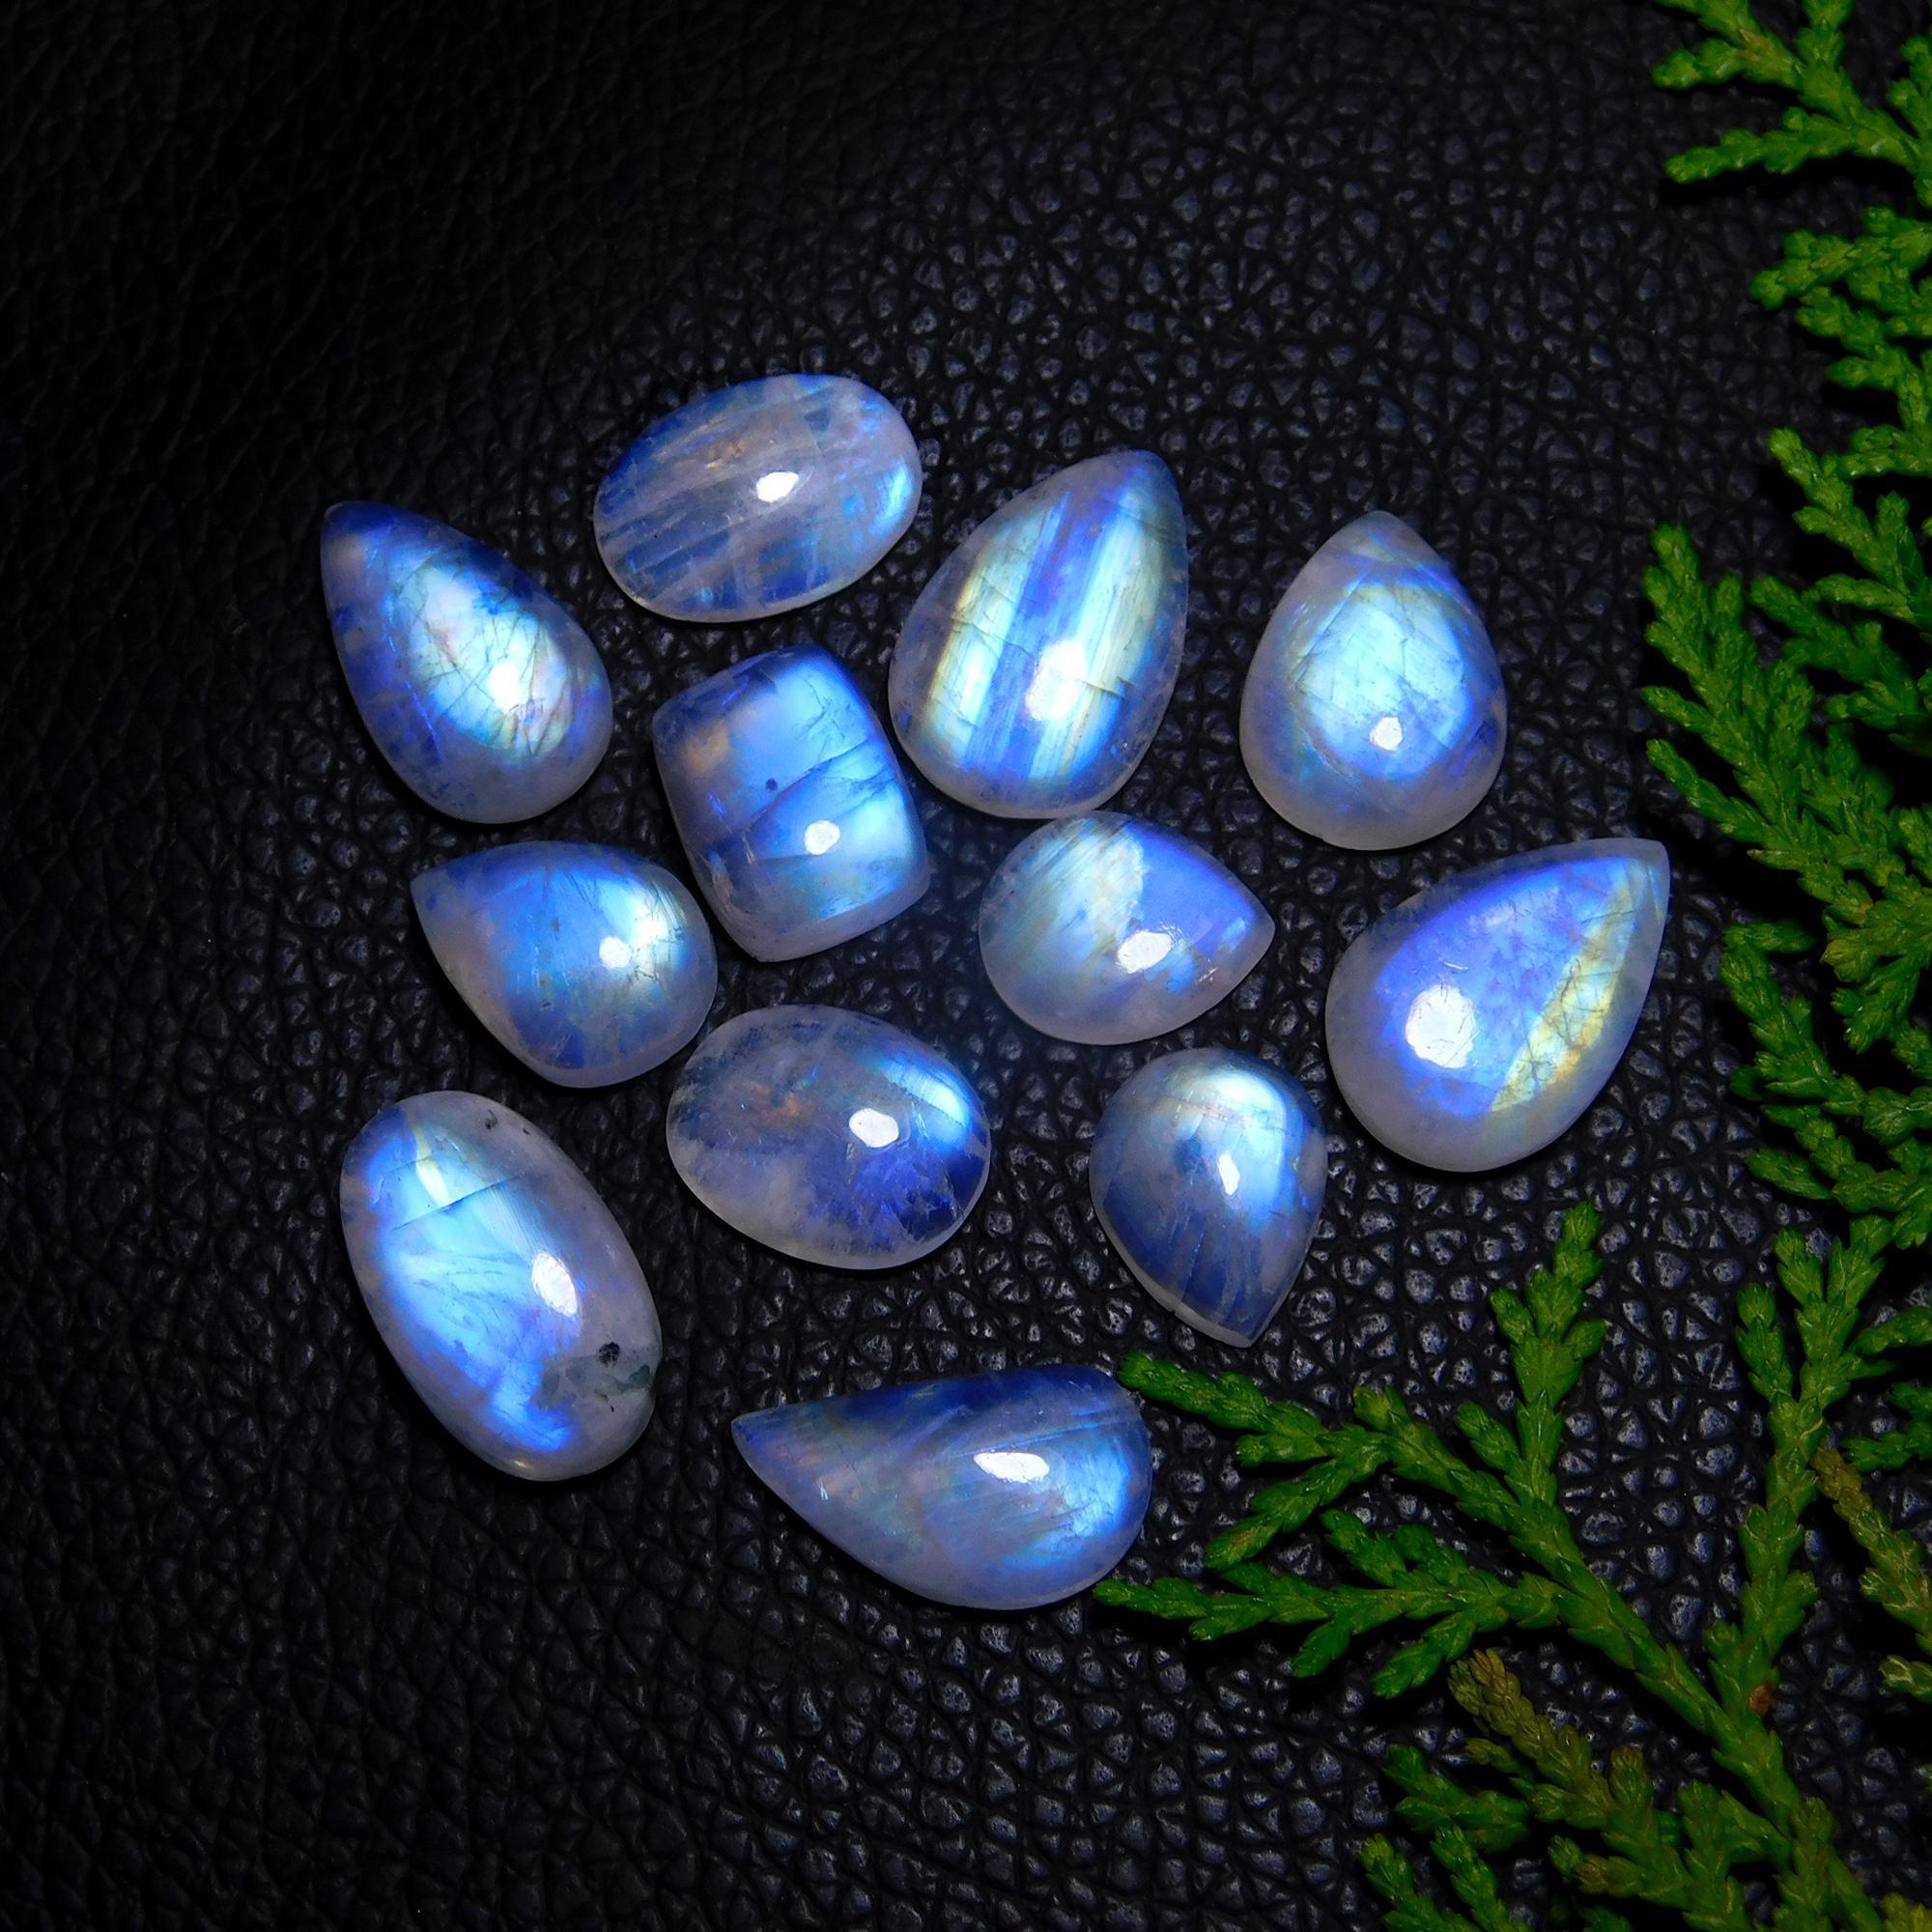 12Pcs 73Cts Natural Rainbow Moonstone Cabochon Blue Fire Loose Gemstone Crystal jewelry supplies wholesale lot gift for her Black Friday 18x10 13x10mm#9436